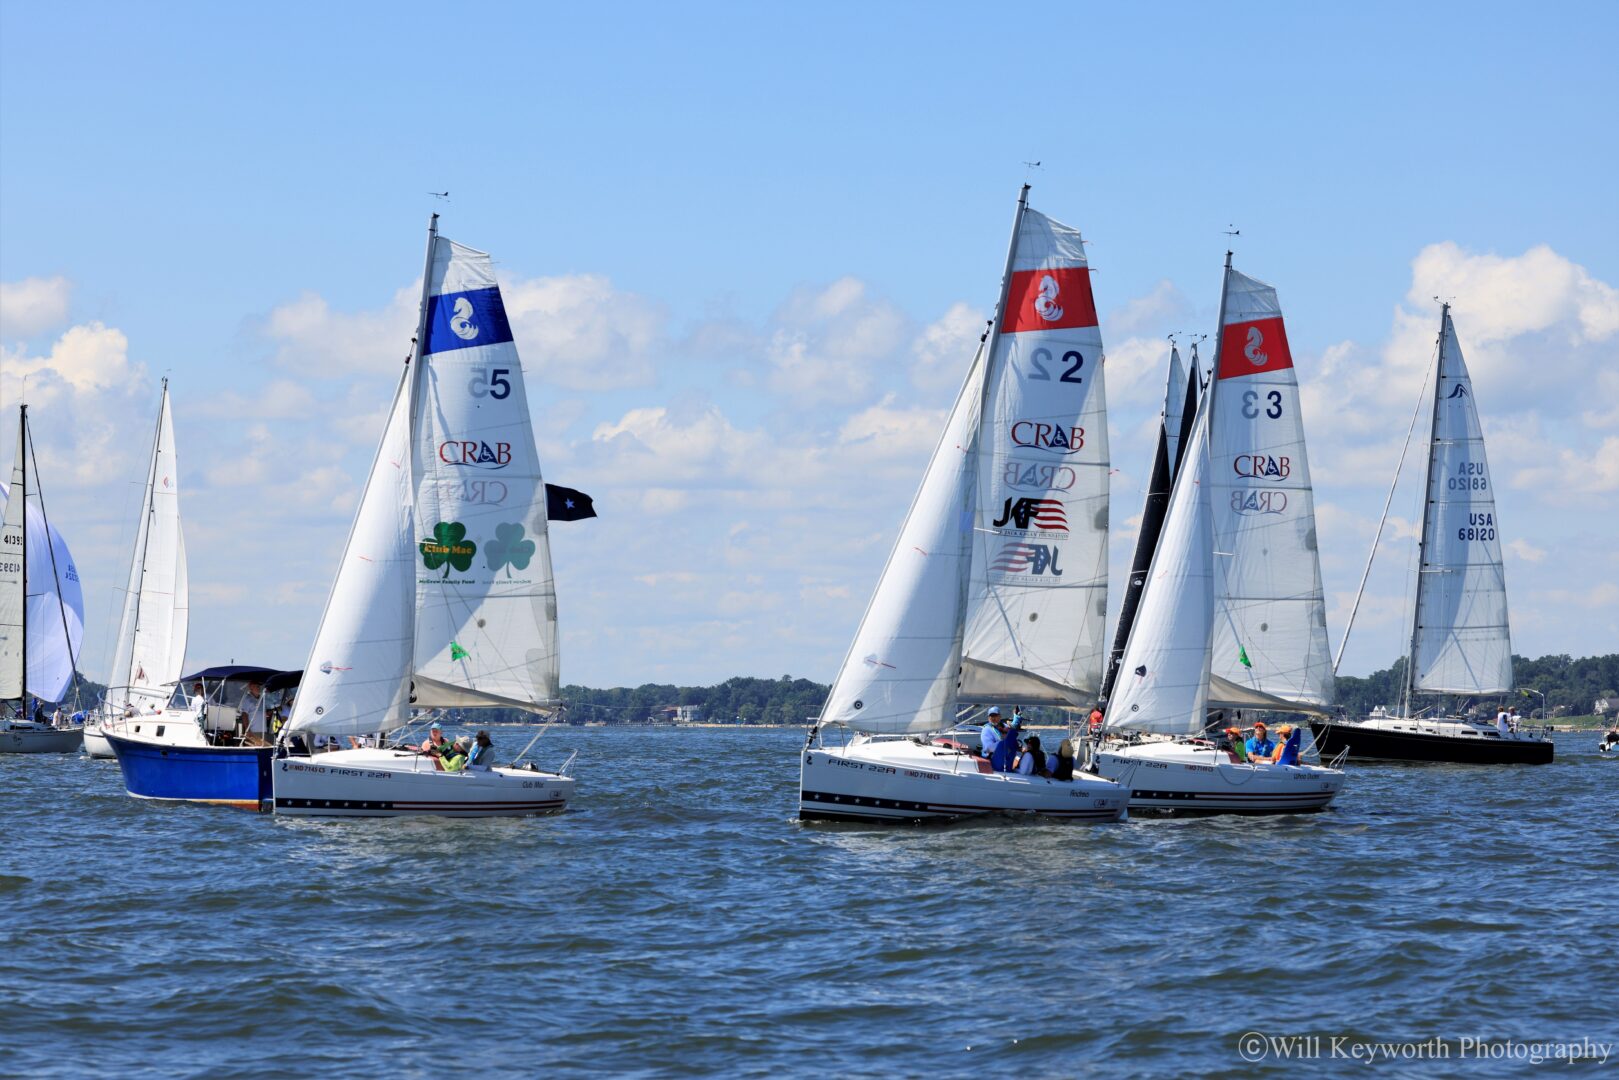 Three CRAB Sailboats under sail in light winds with blue sky. You can see several other boats in the background